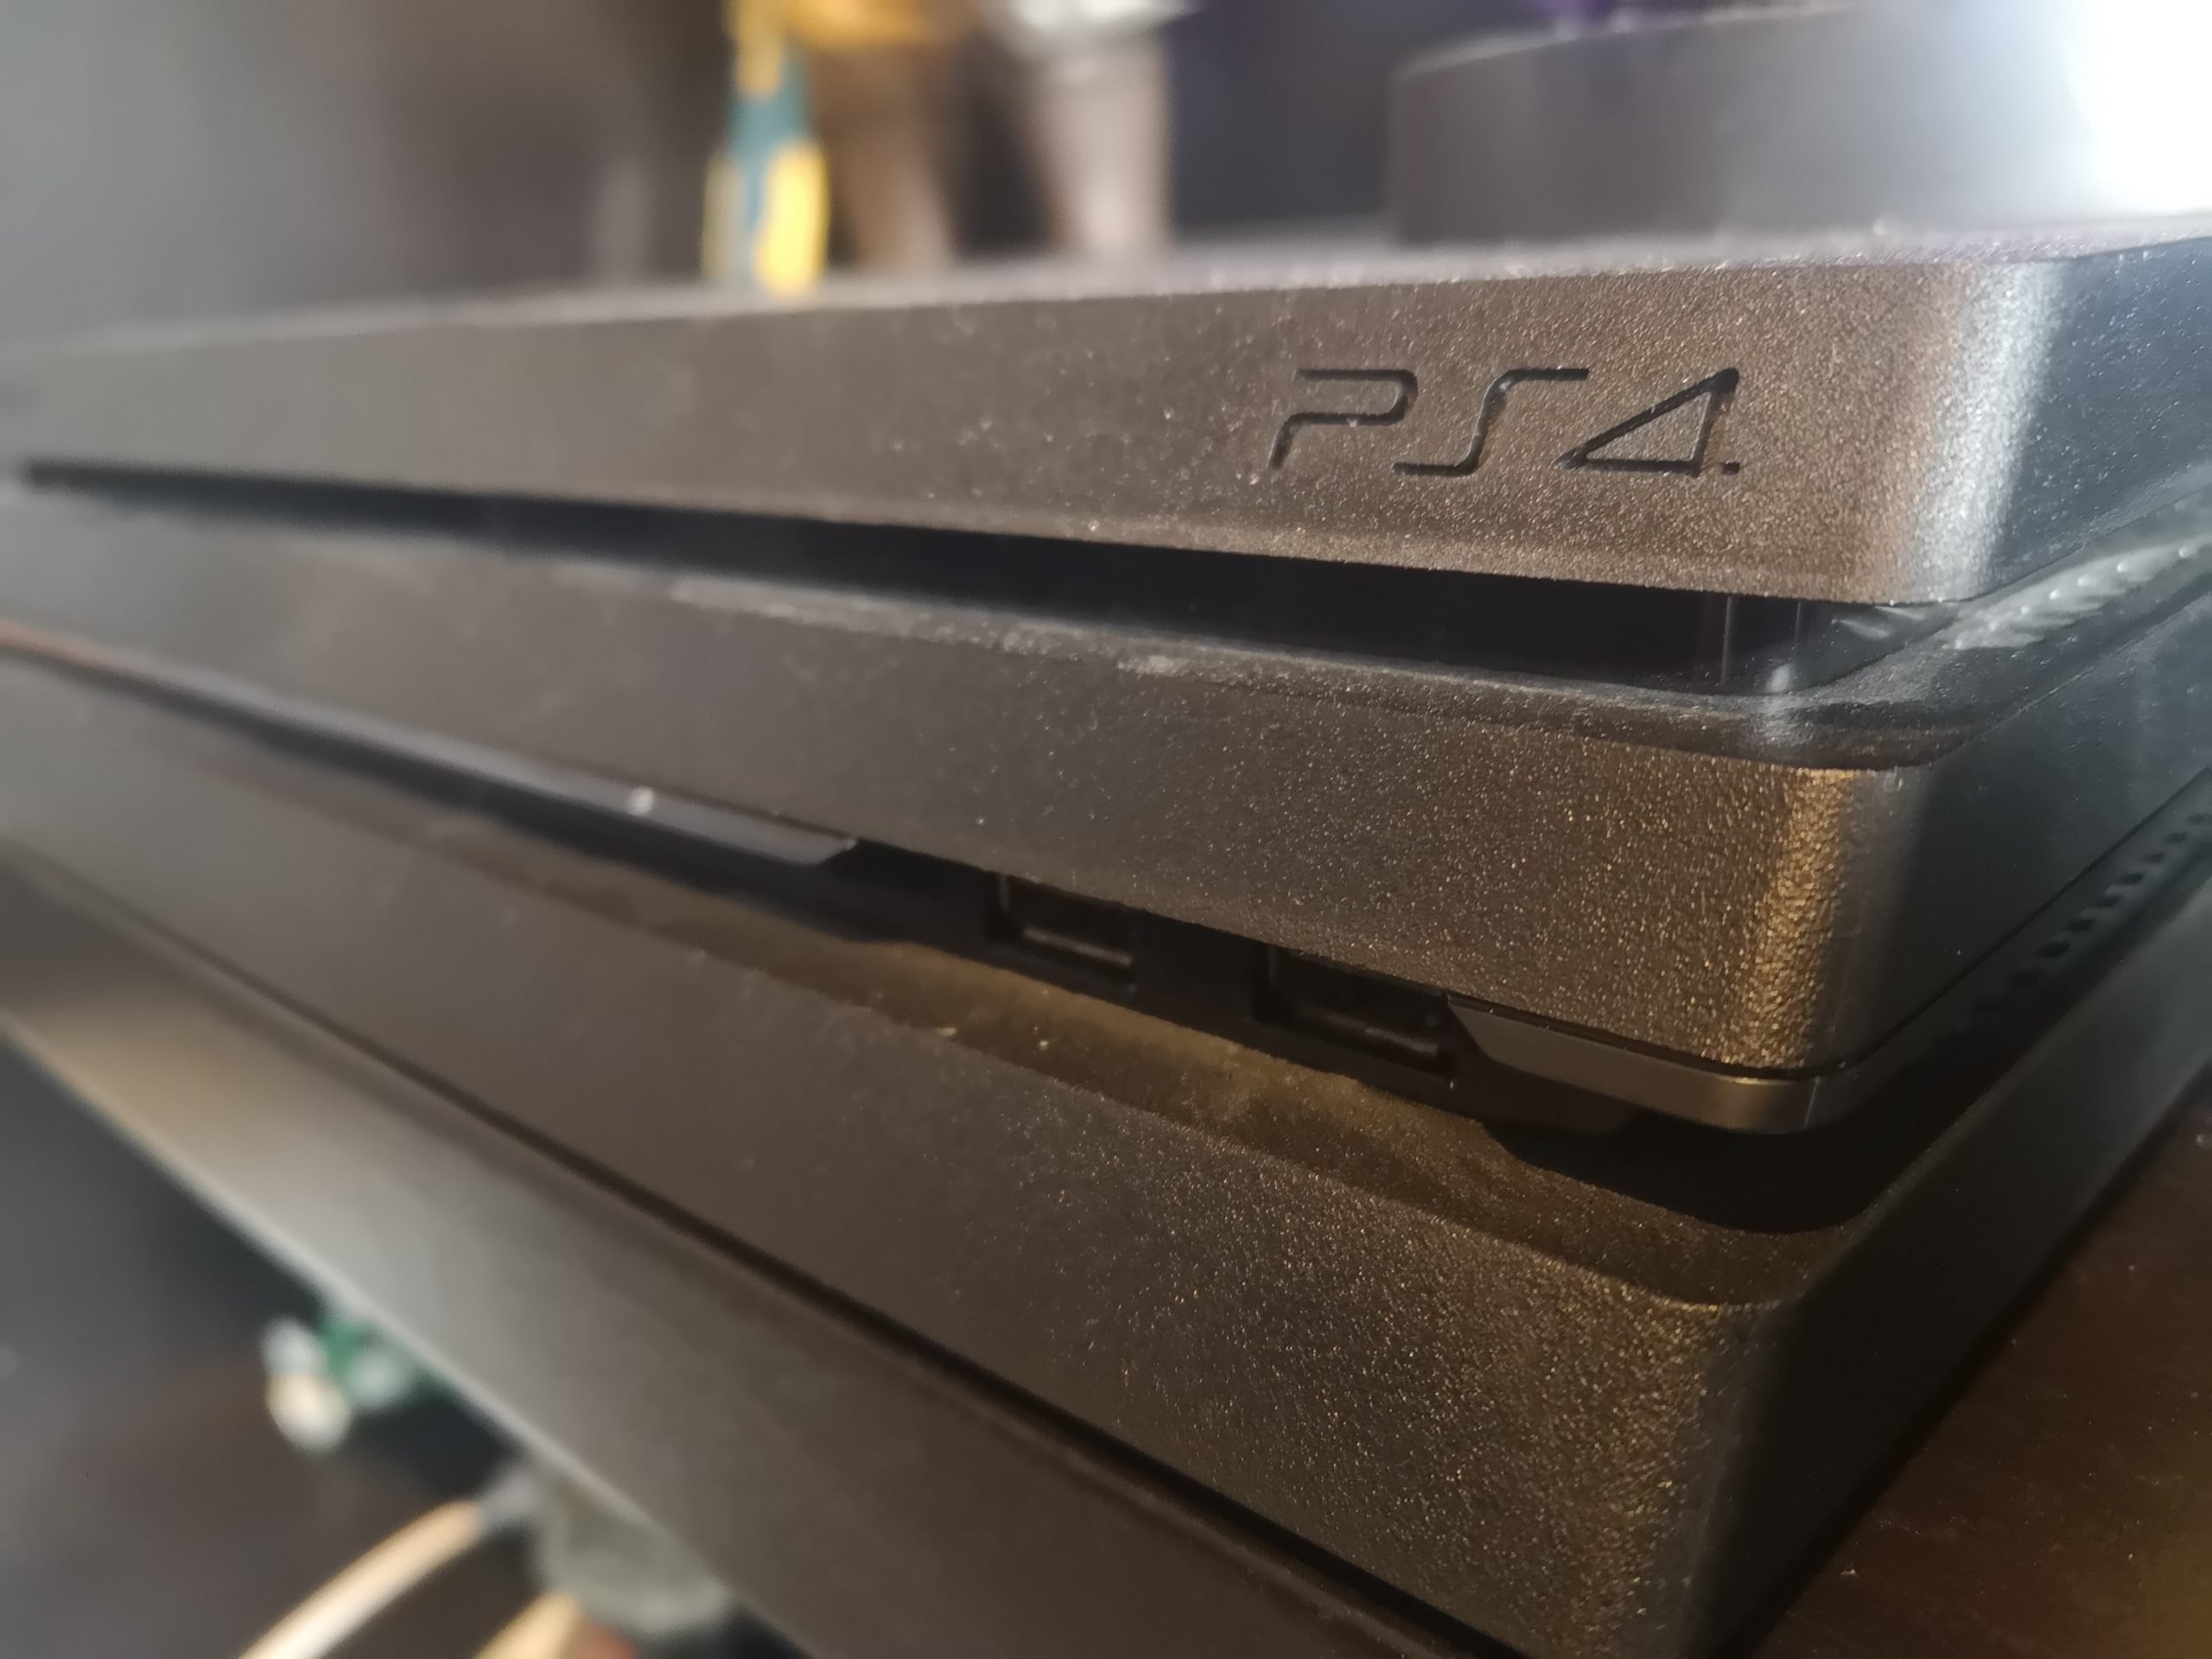 power button on ps4 pro